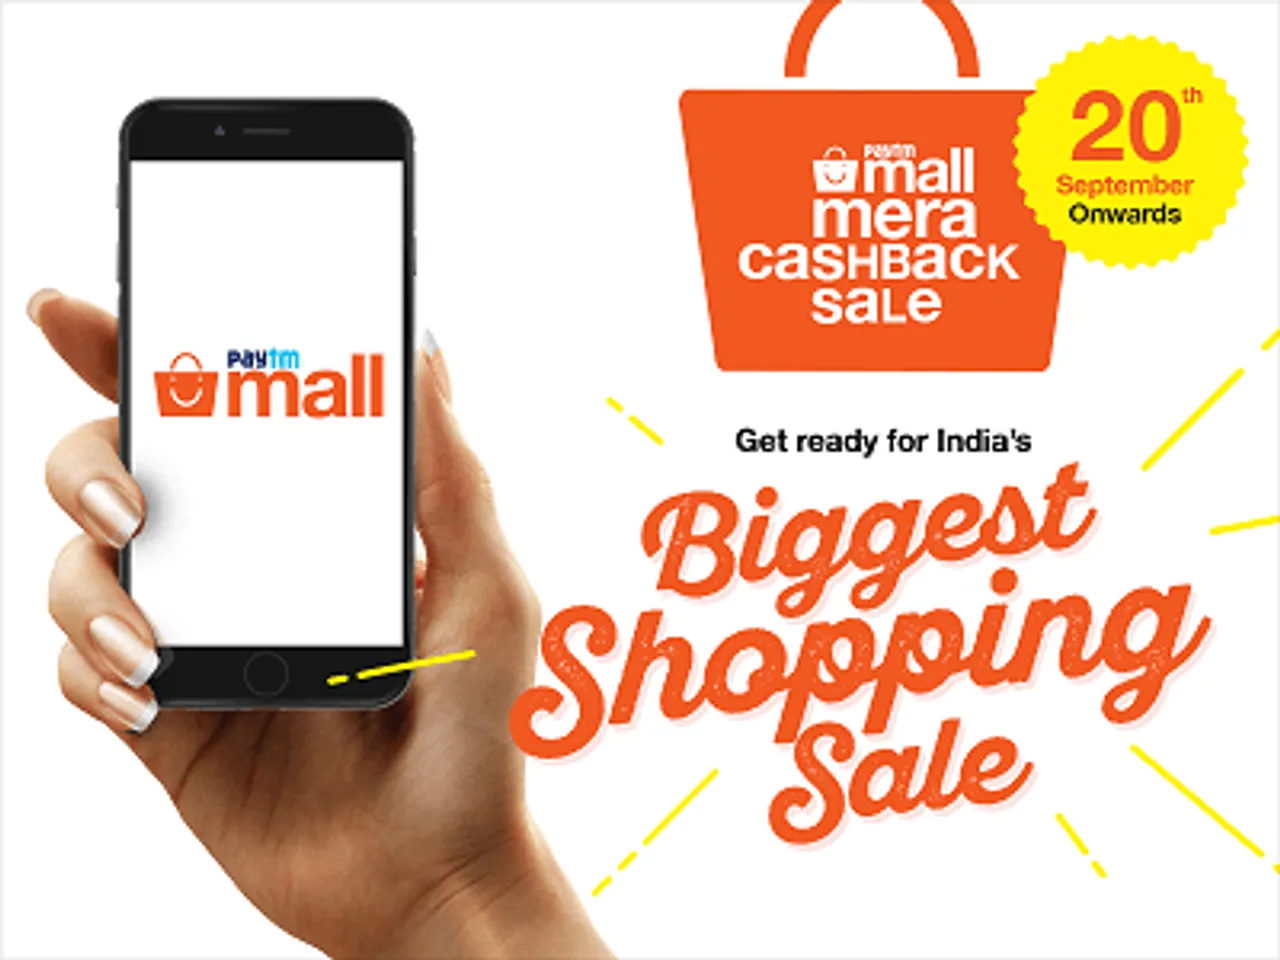 Bag the best Smartphones and Laptops at Paytm Mall - Mera Cashback Sale